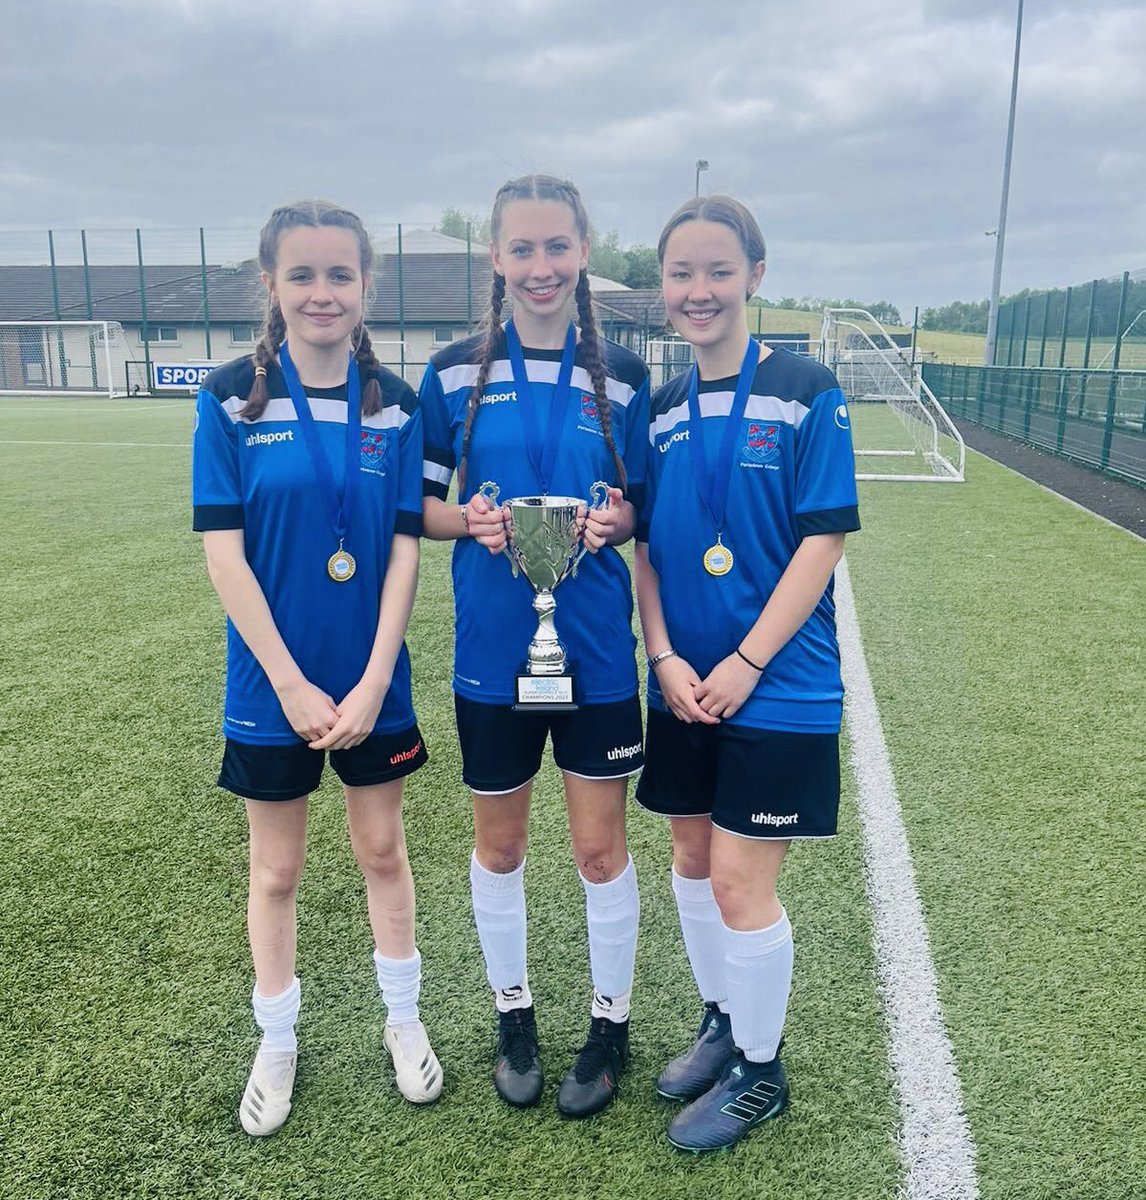 Congratulations to Hanover girls Zoe Burn, Emily Adamson, Keeley Telford and their Portadown College teammates who won the Electric Ireland 7-a-side Schools Cup 👏🏻⚽️🏆 great achievement girls and coaches, well done 💙